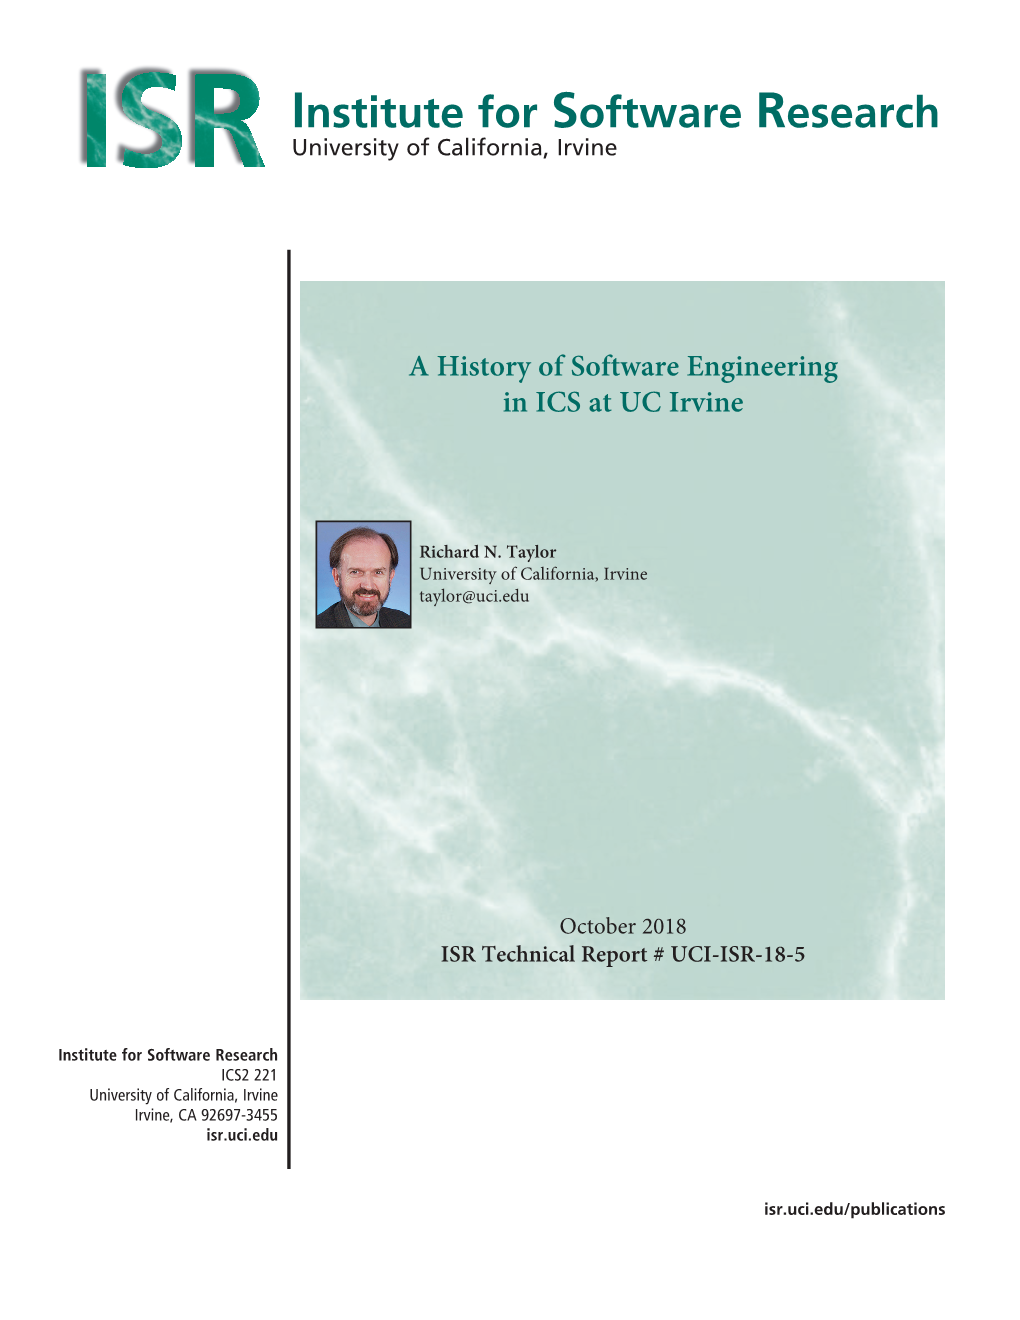 A History of Software Engineering in ICS at UC Irvine